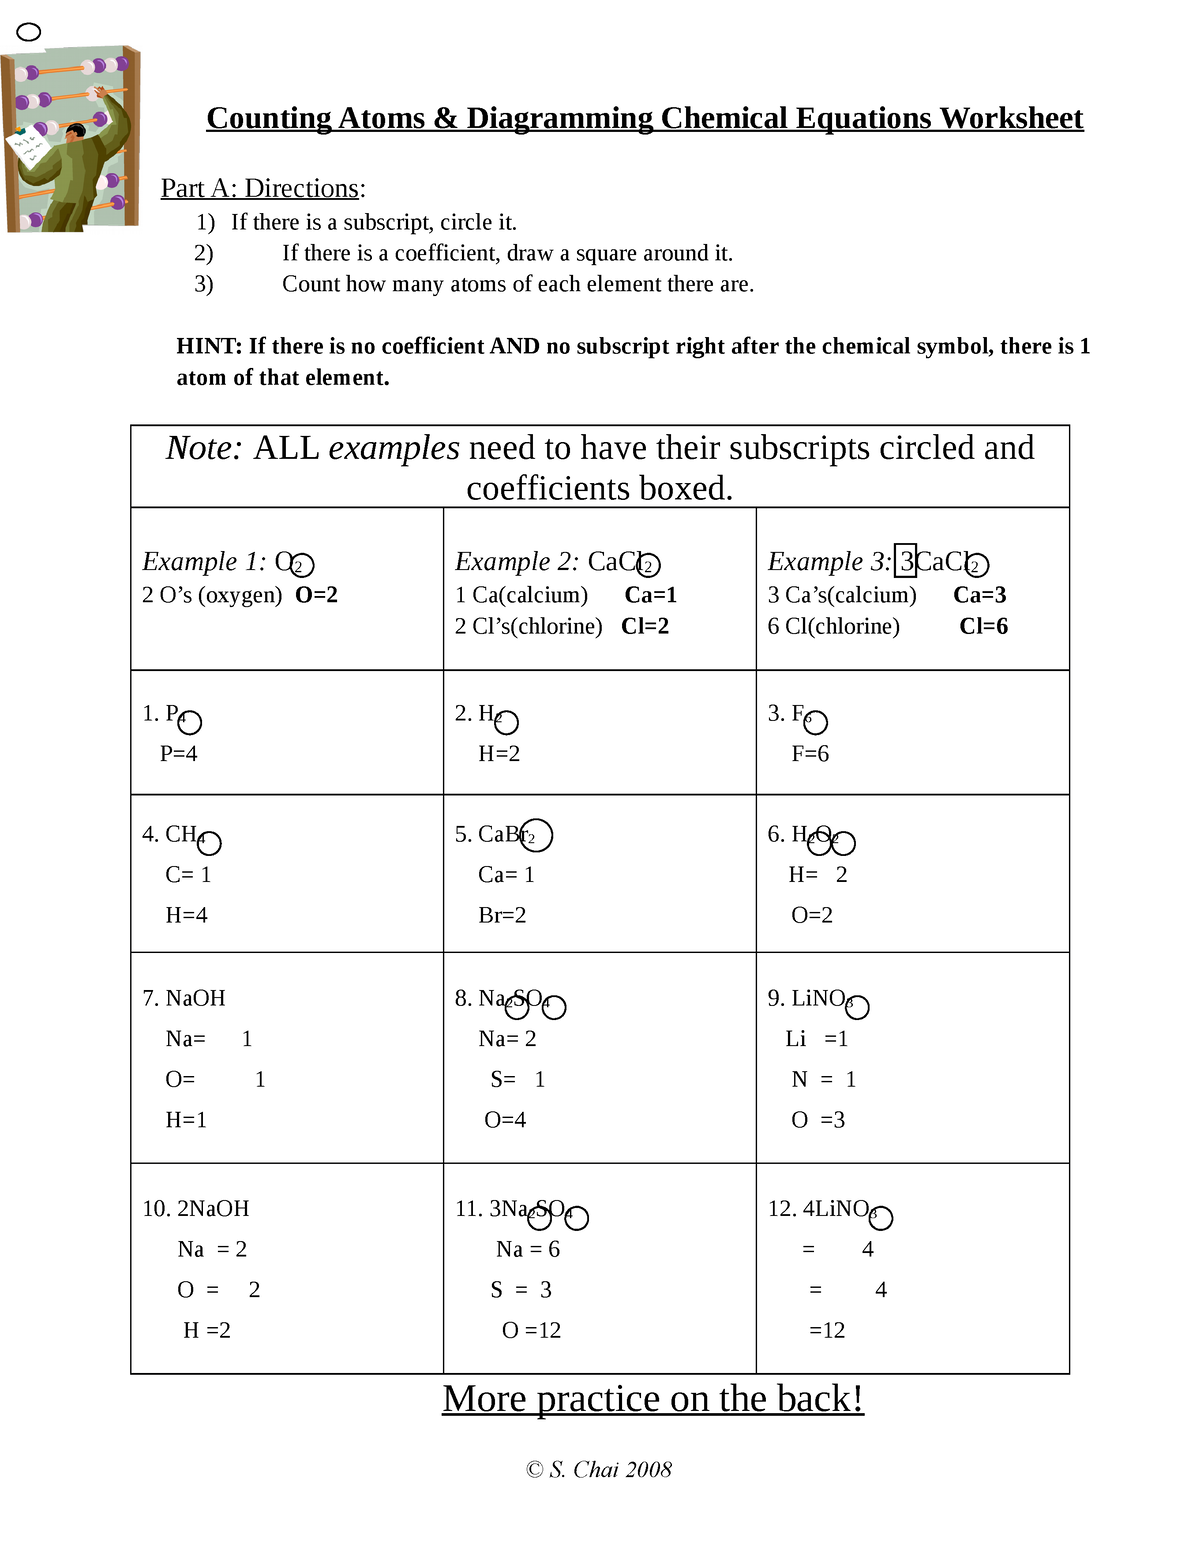 copy-of-counting-atoms-worksheet-counting-atoms-diagramming